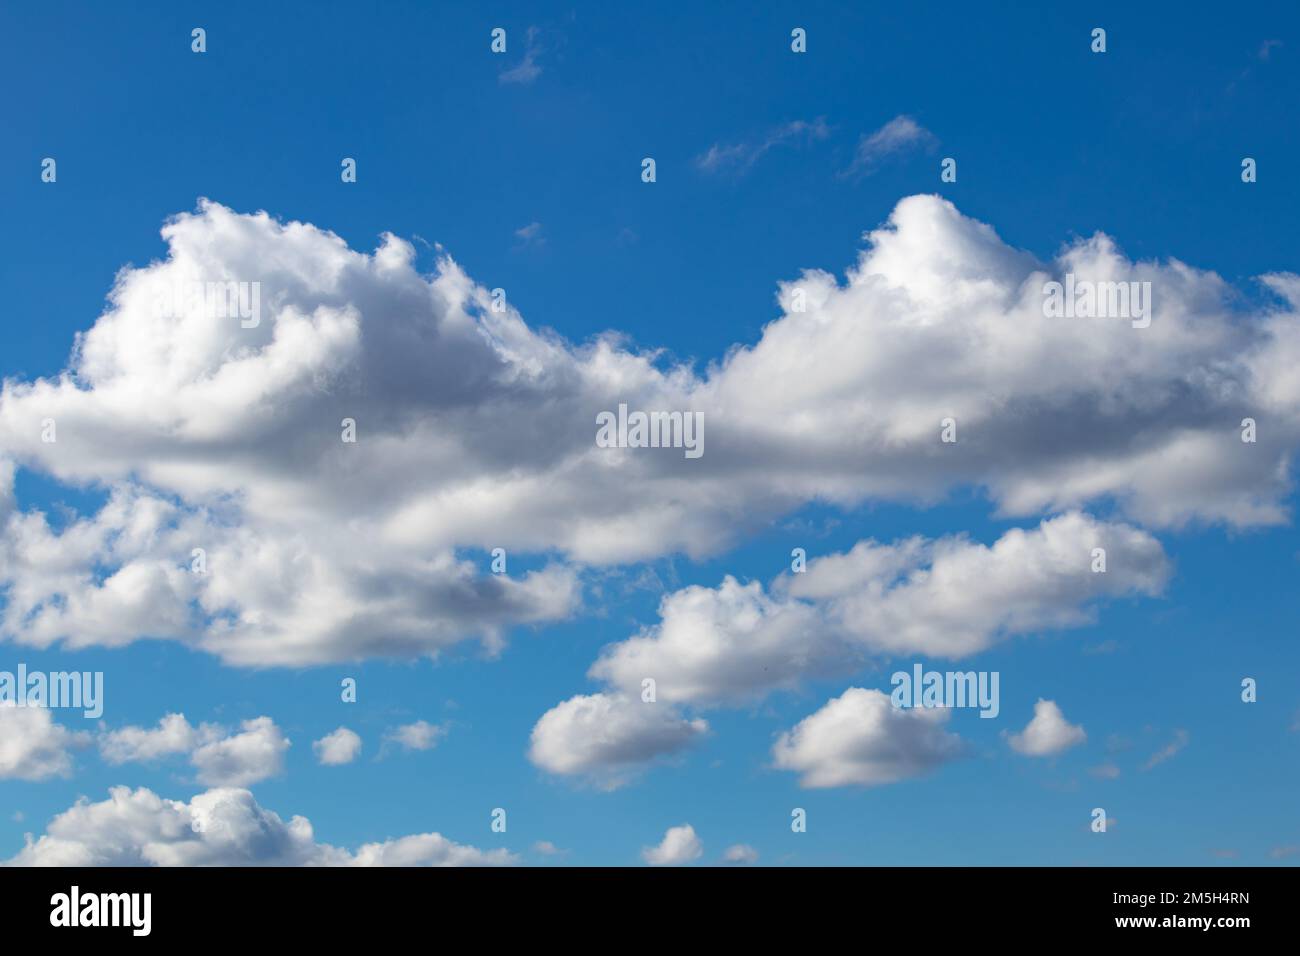 Cloudy blue sky, white clouds background with deep blue sky. Wallpaper with sunlight. Texture, pattern idea concept. Horizontal photo. No people. Stock Photo